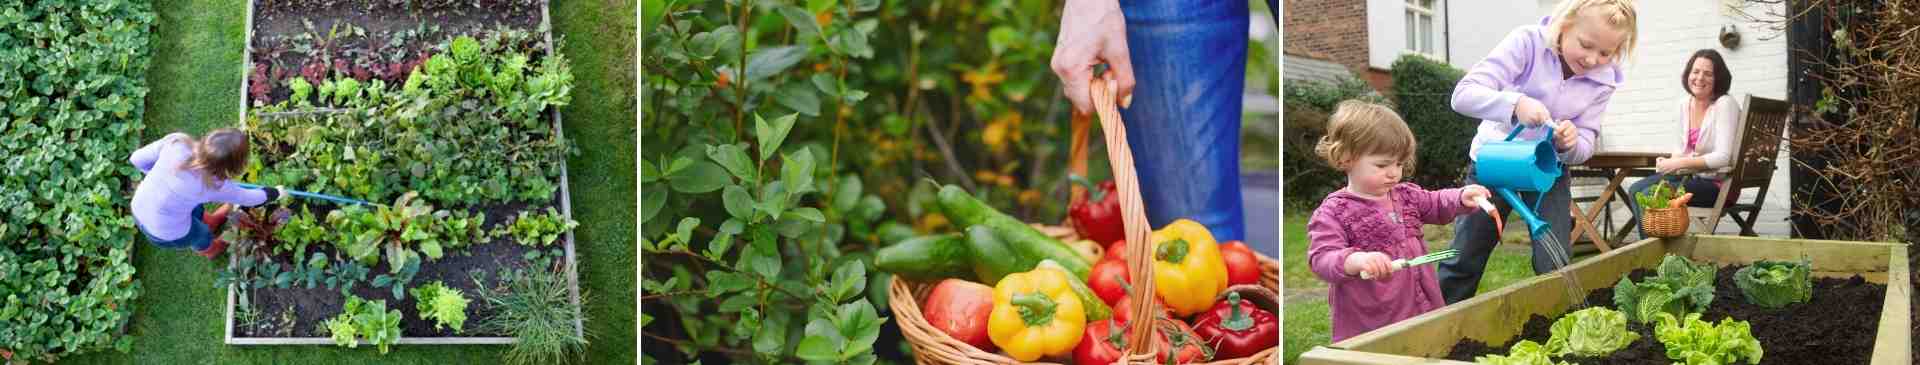 Low-Maintenance Vegetable Gardening - Homegrown Produce Without the Hassle